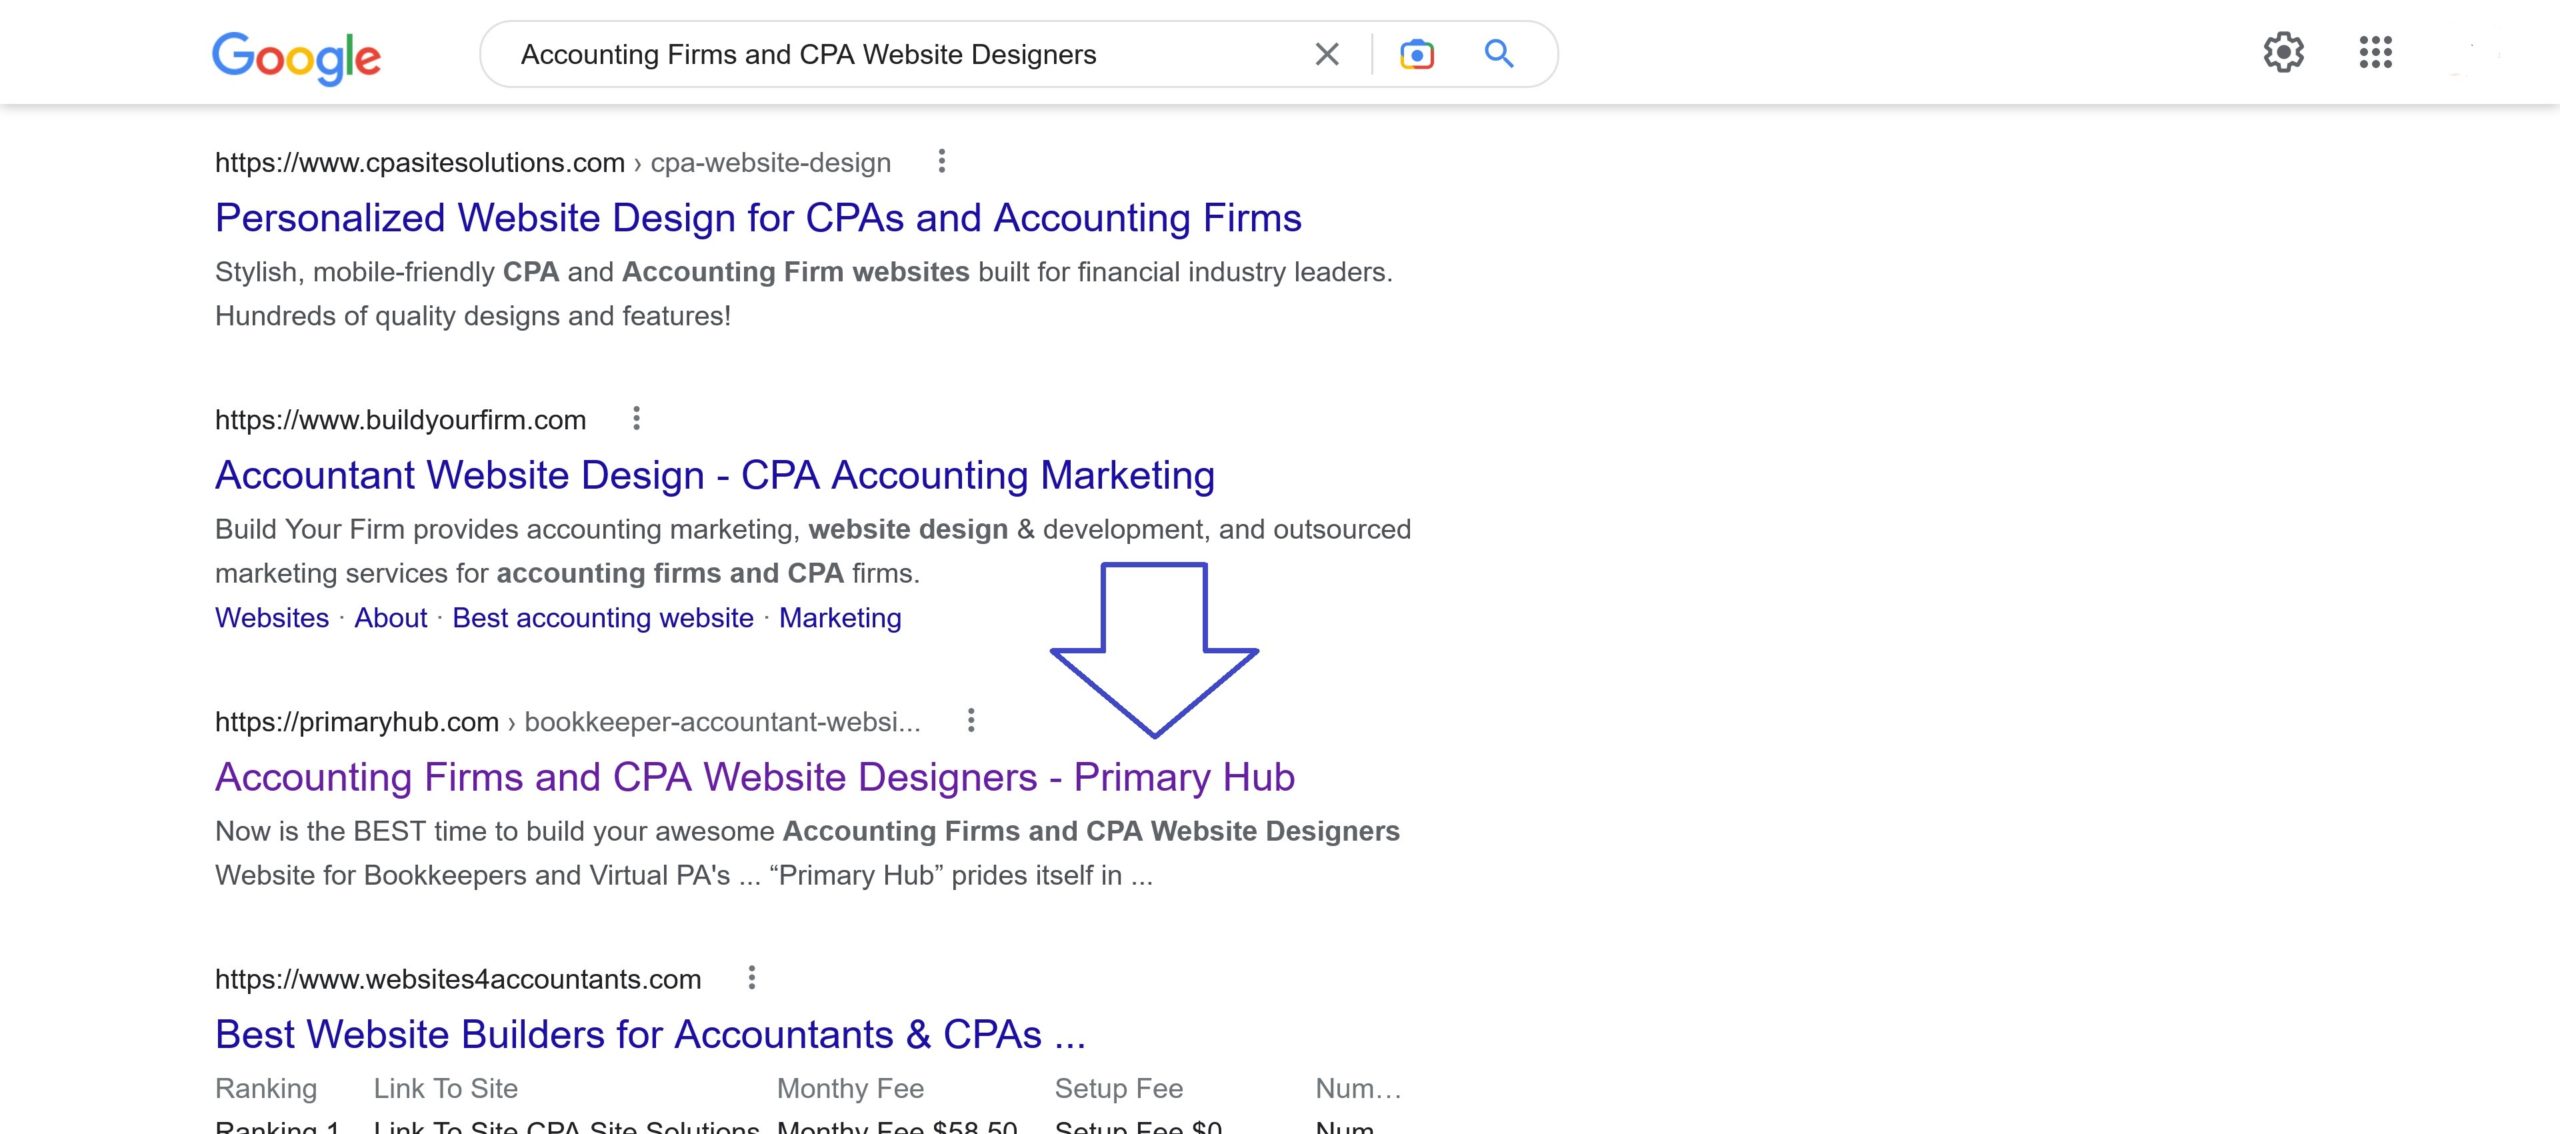  Personalized Website Design for CPAs and Accounting Firms